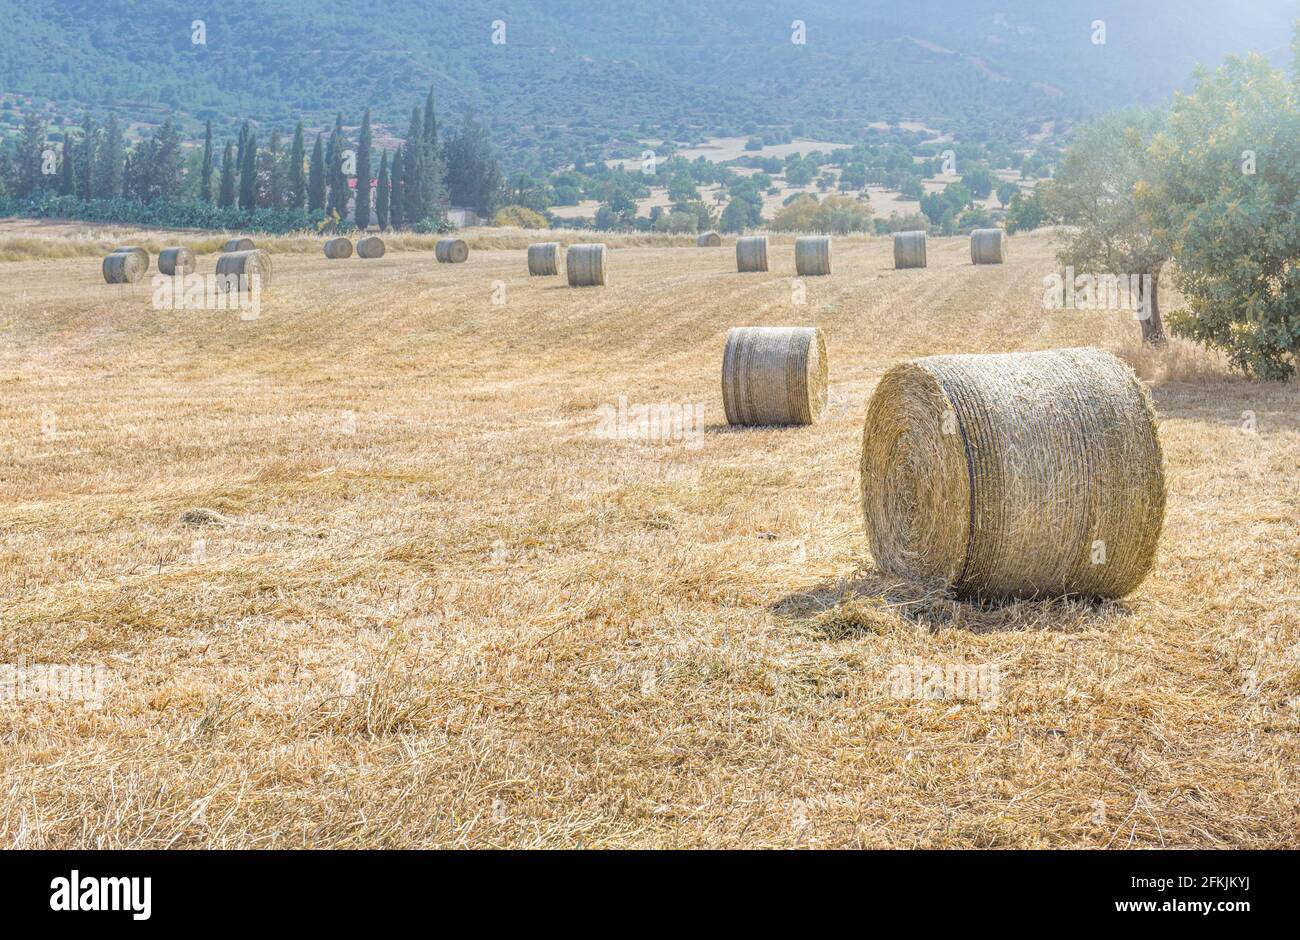 Hay stacks in a field of dry grass with cypress trees and mountains as background. Mediterranean summer landscape Stock Photo